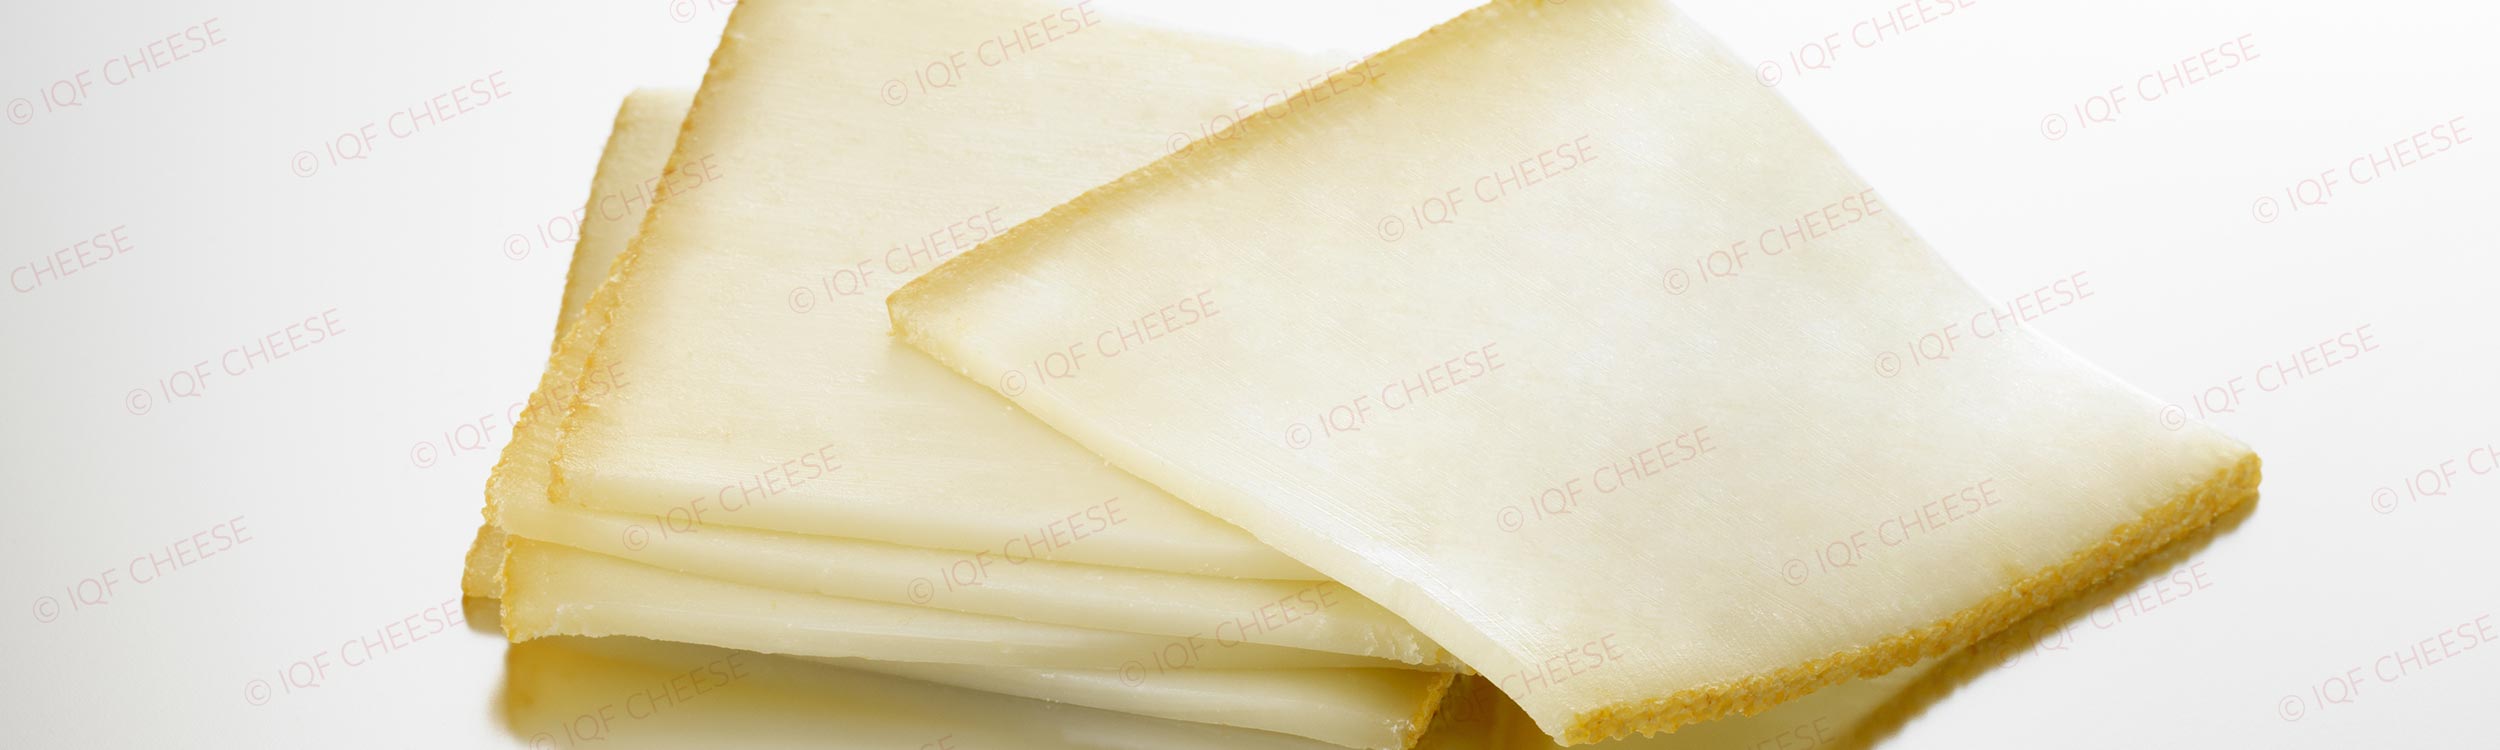 IQF Raclette Slices